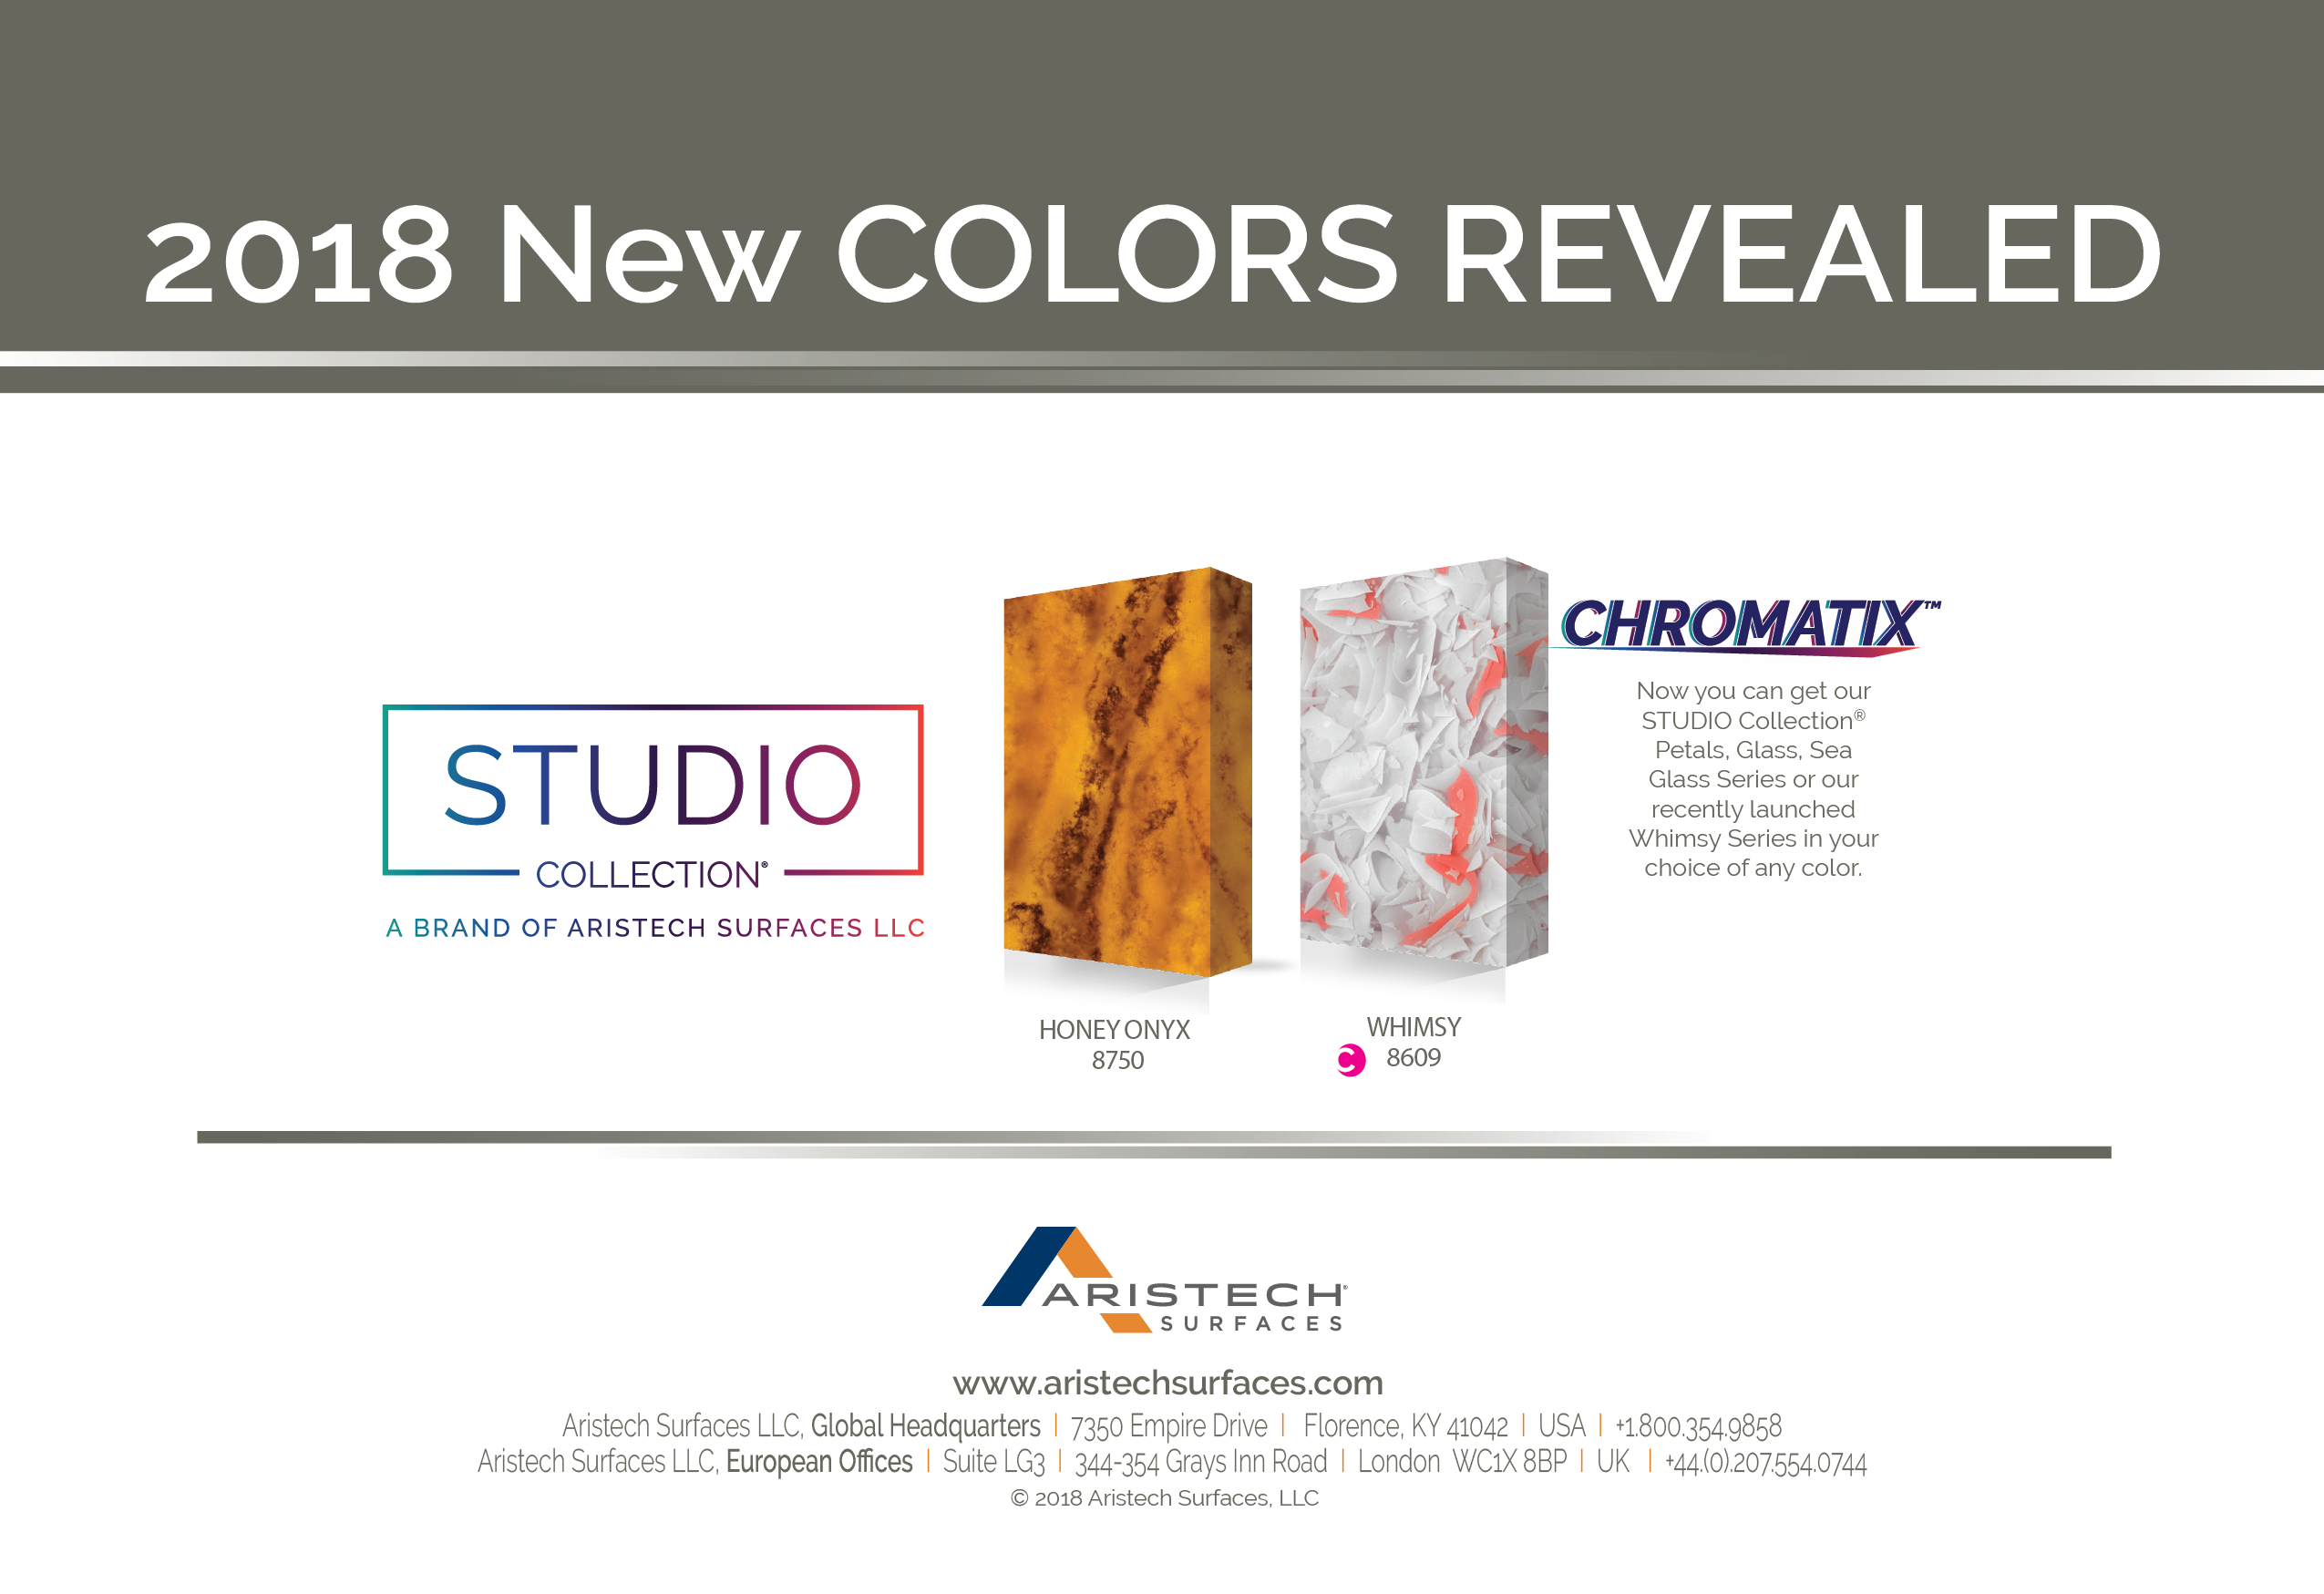 STUDIO Collection® New Colors for 2018